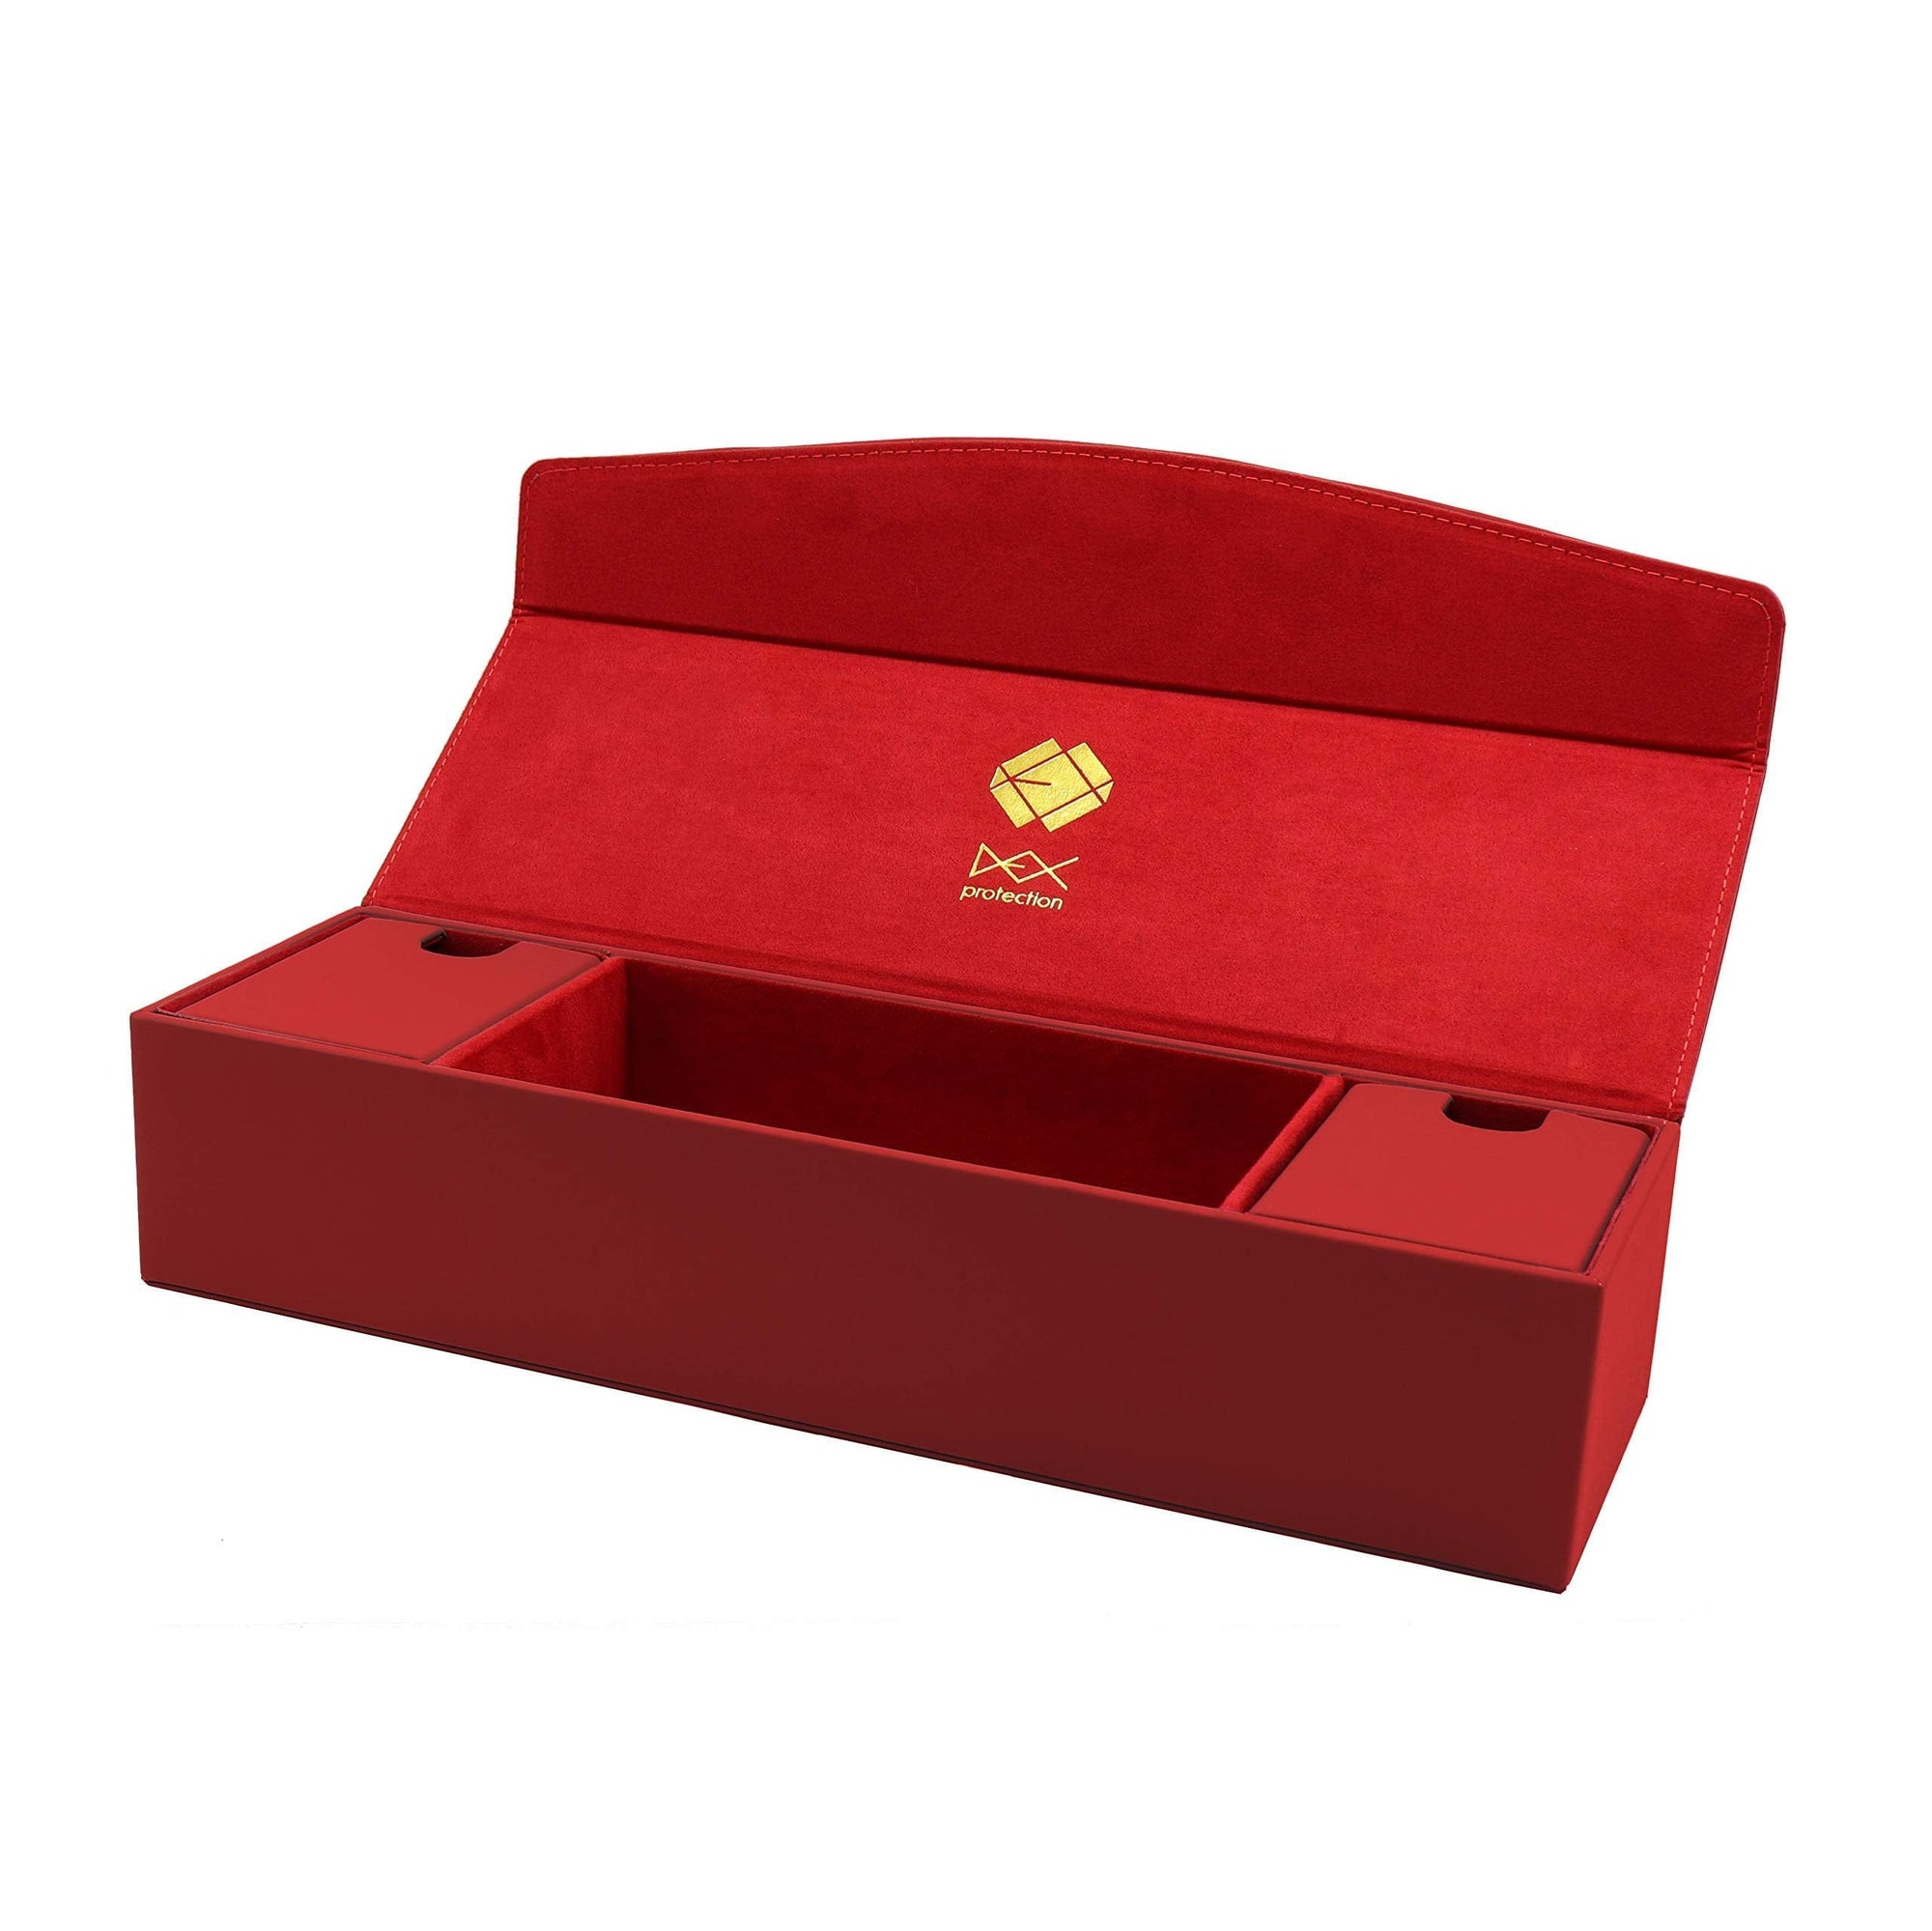 Dex Protection Accessories Dex Protection Game Chest Storage Box: Red